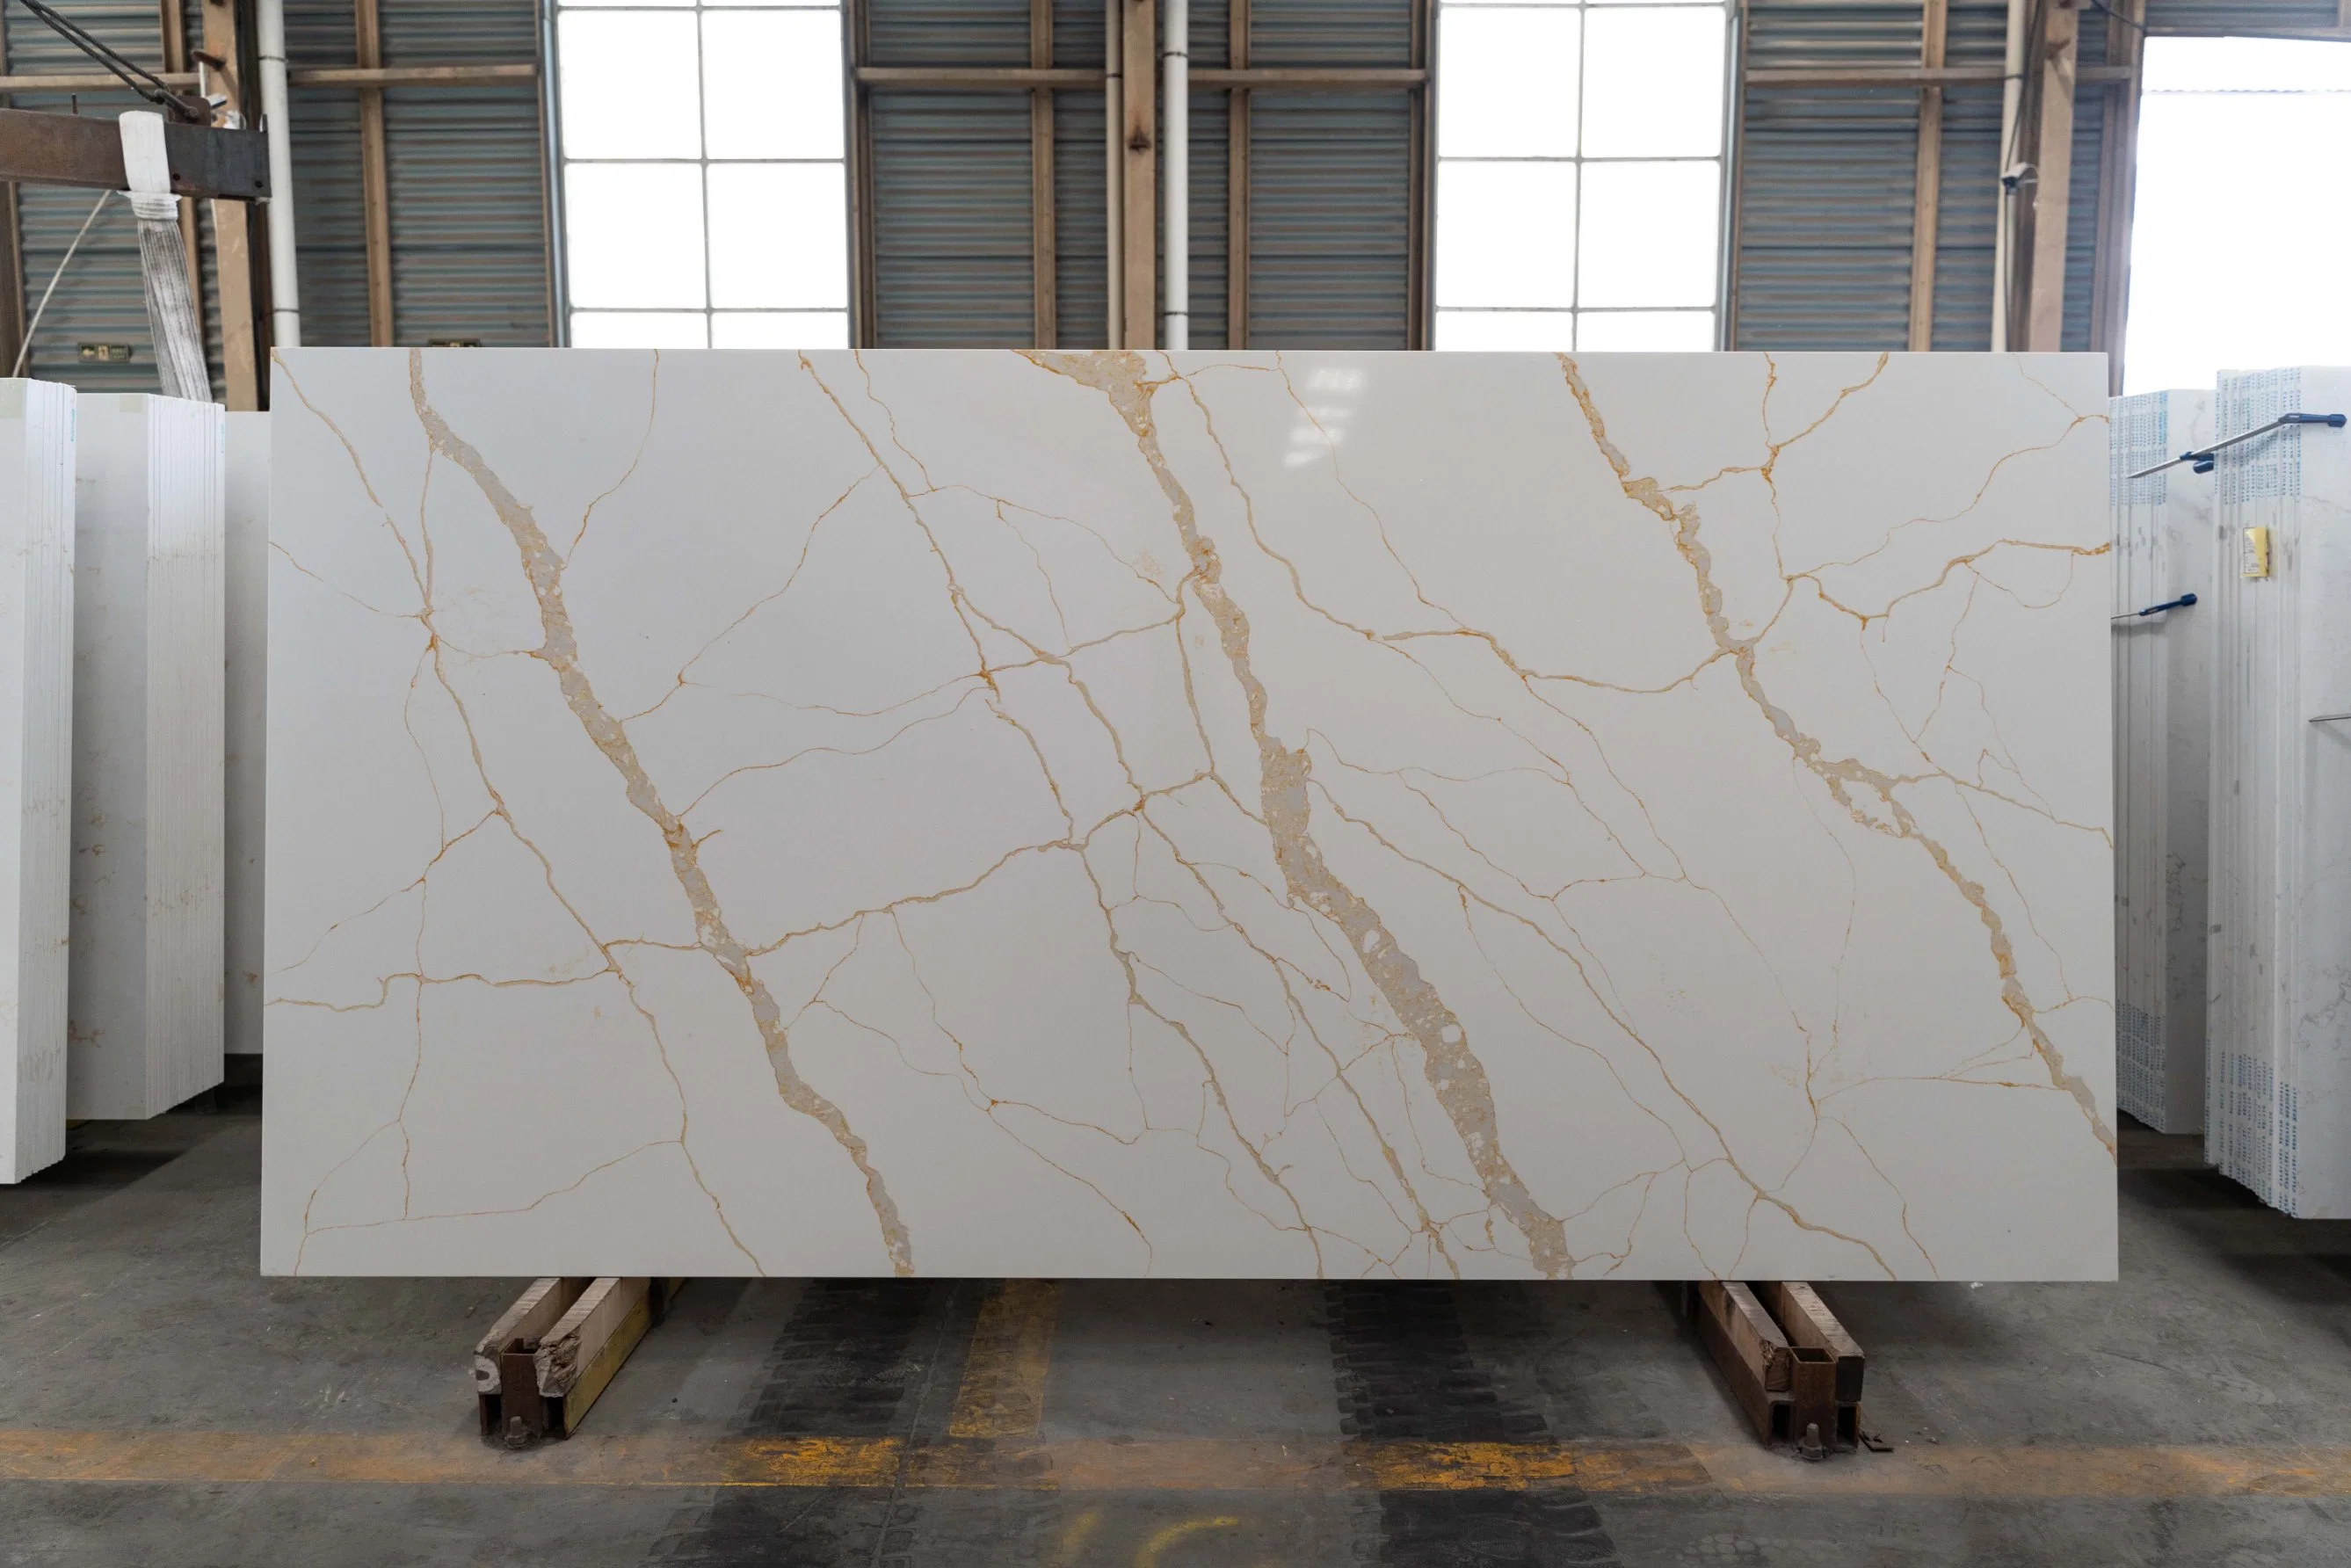 Polished Artificial Quartz Stone for Countertops/Vanity Tops/Hotel Design with Solid Calacatta Surface